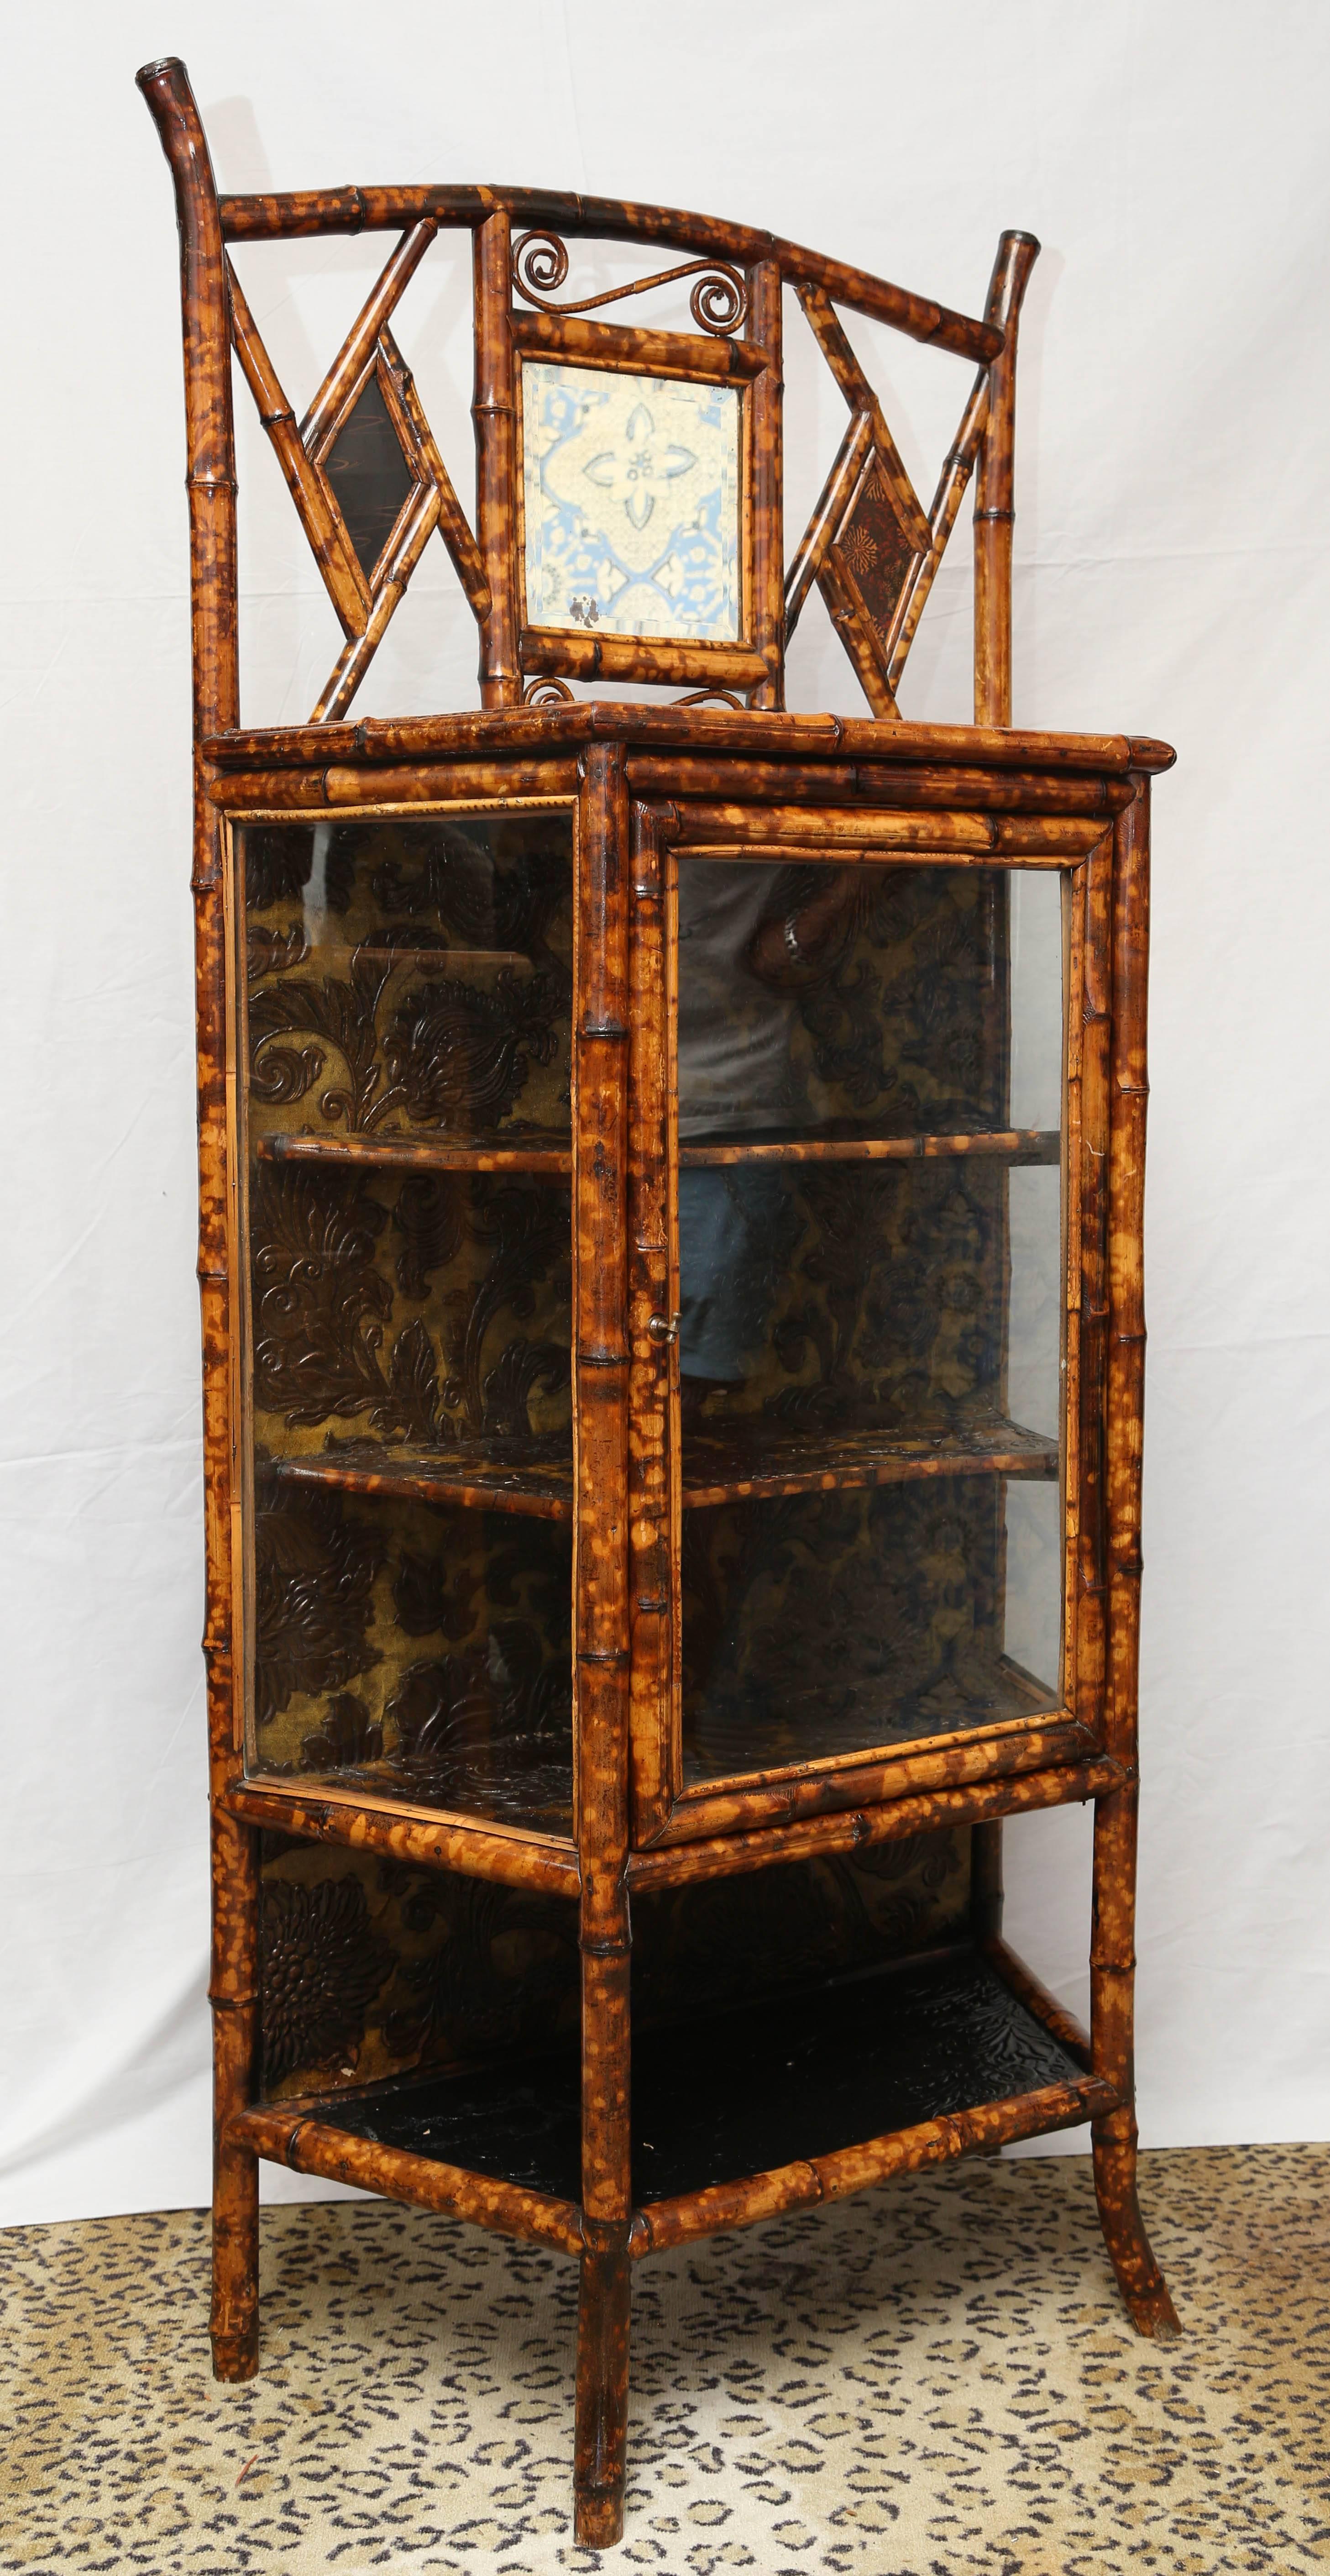 A nice English lacquer bamboo cabinet or bookcase, the pierced back inset with a beveled square mirror flanked by lacquered panels, the lacquered trapezoidal top with a glazed door opening to a shelved interior, over a medial shelf on Sabre legs.